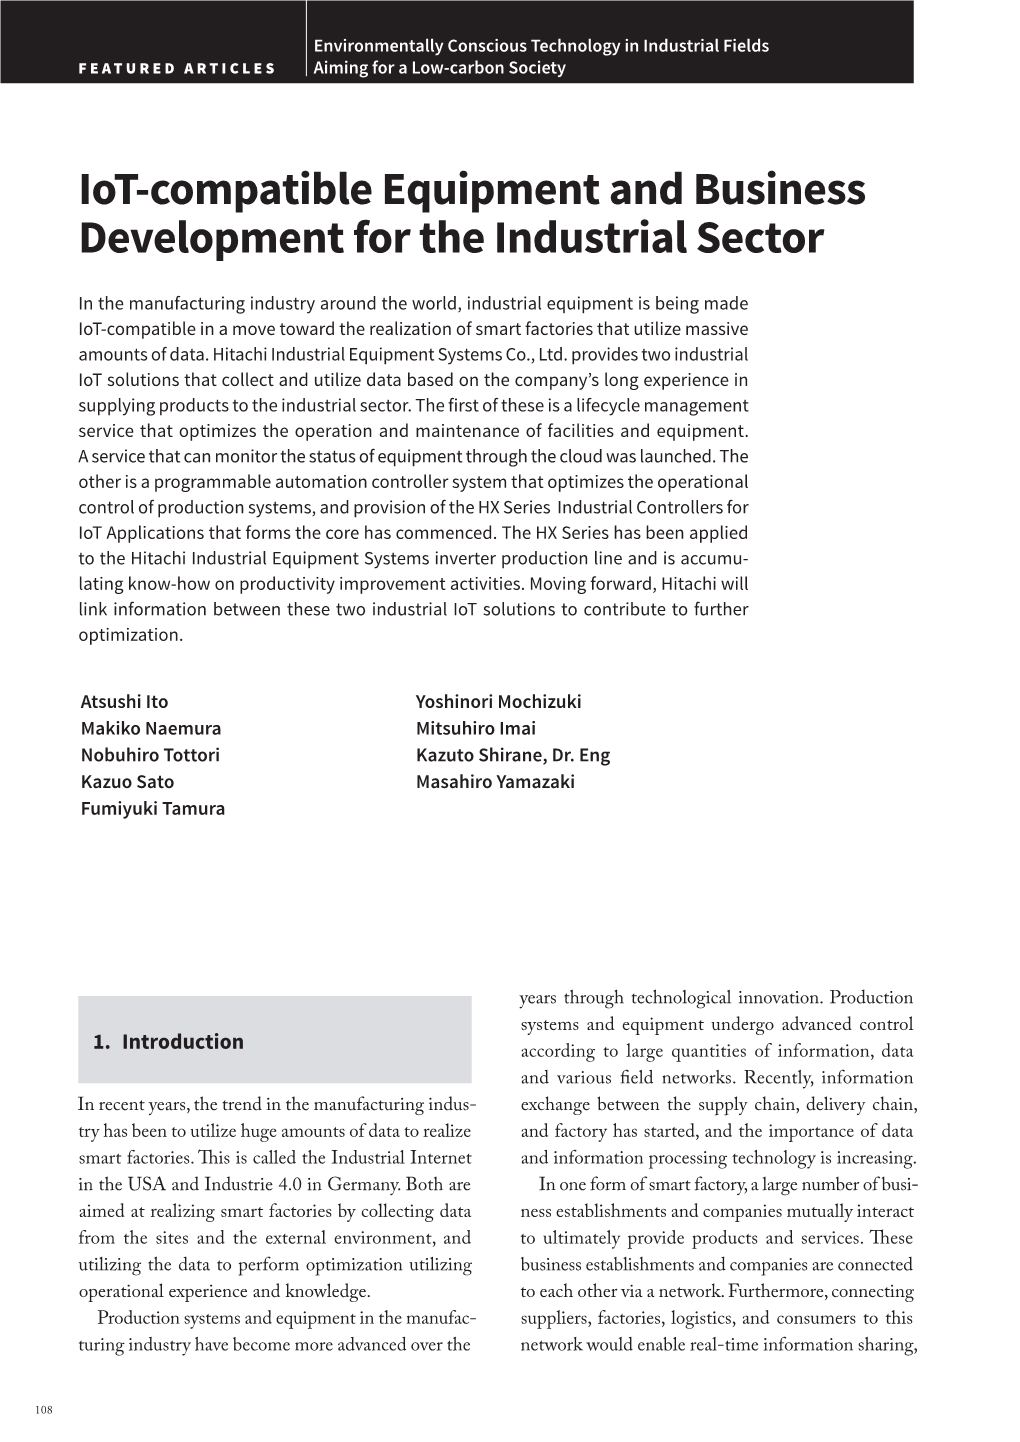 Iot-Compatible Equipment and Business Development for the Industrial Sector